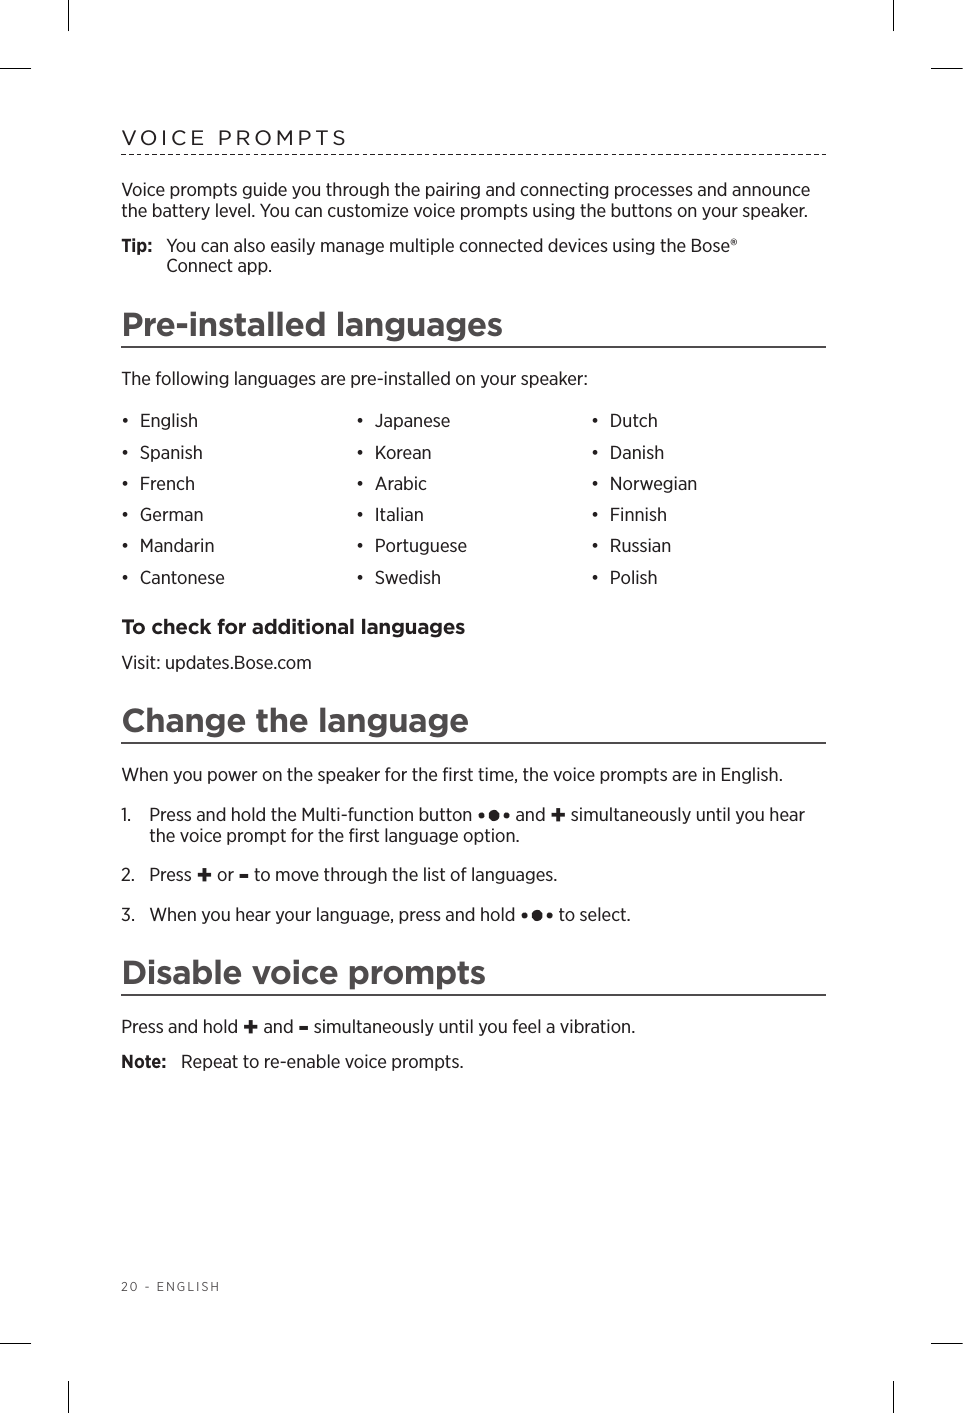 20 - ENGLISHVOICE PROMPTSVoice prompts guide you through the pairing and connecting processes and announce the battery level. You can customize voice prompts using the buttons on your speaker.Tip:  You can also easily manage multiple connected devices using the Bose®  Connect app.Pre-installed languagesThe following languages are pre-installed on your speaker:•  English •  Japanese •  Dutch•  Spanish •  Korean •  Danish•  French •  Arabic •  Norwegian•  German •  Italian •  Finnish•  Mandarin •  Portuguese •  Russian•  Cantonese •  Swedish •  PolishTo check for additional languagesVisit: updates.Bose.comChange the languageWhen you power on the speaker for the ﬁrst time, the voice prompts are in English. 1.   Press and hold the Multi-function button   and + simultaneously until you hear the voice prompt for the ﬁrst language option. 2.  Press + or - to move through the list of languages.3.   When you hear your language, press and hold   to select.Disable voice promptsPress and hold + and - simultaneously until you feel a vibration. Note:  Repeat to re-enable voice prompts.